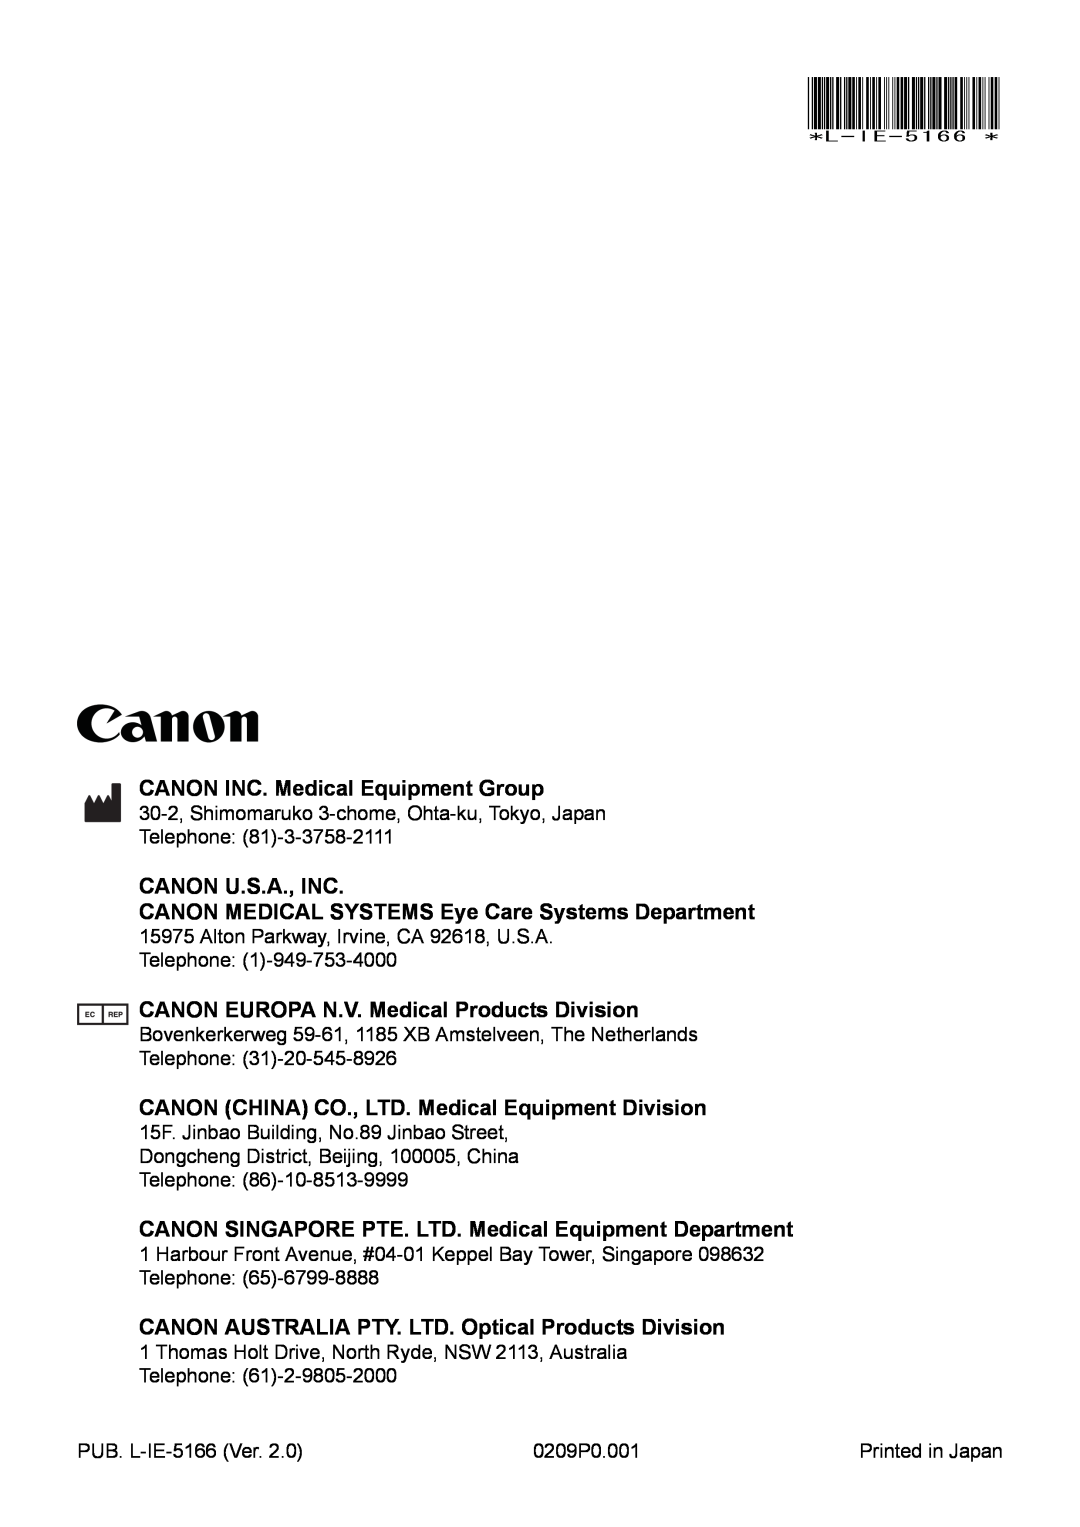 Canon CR-1 MARK II CANON INC. Medical Equipment Group, CANON U.S.A., INC CANON MEDICAL SYSTEMS Eye Care Systems Department 